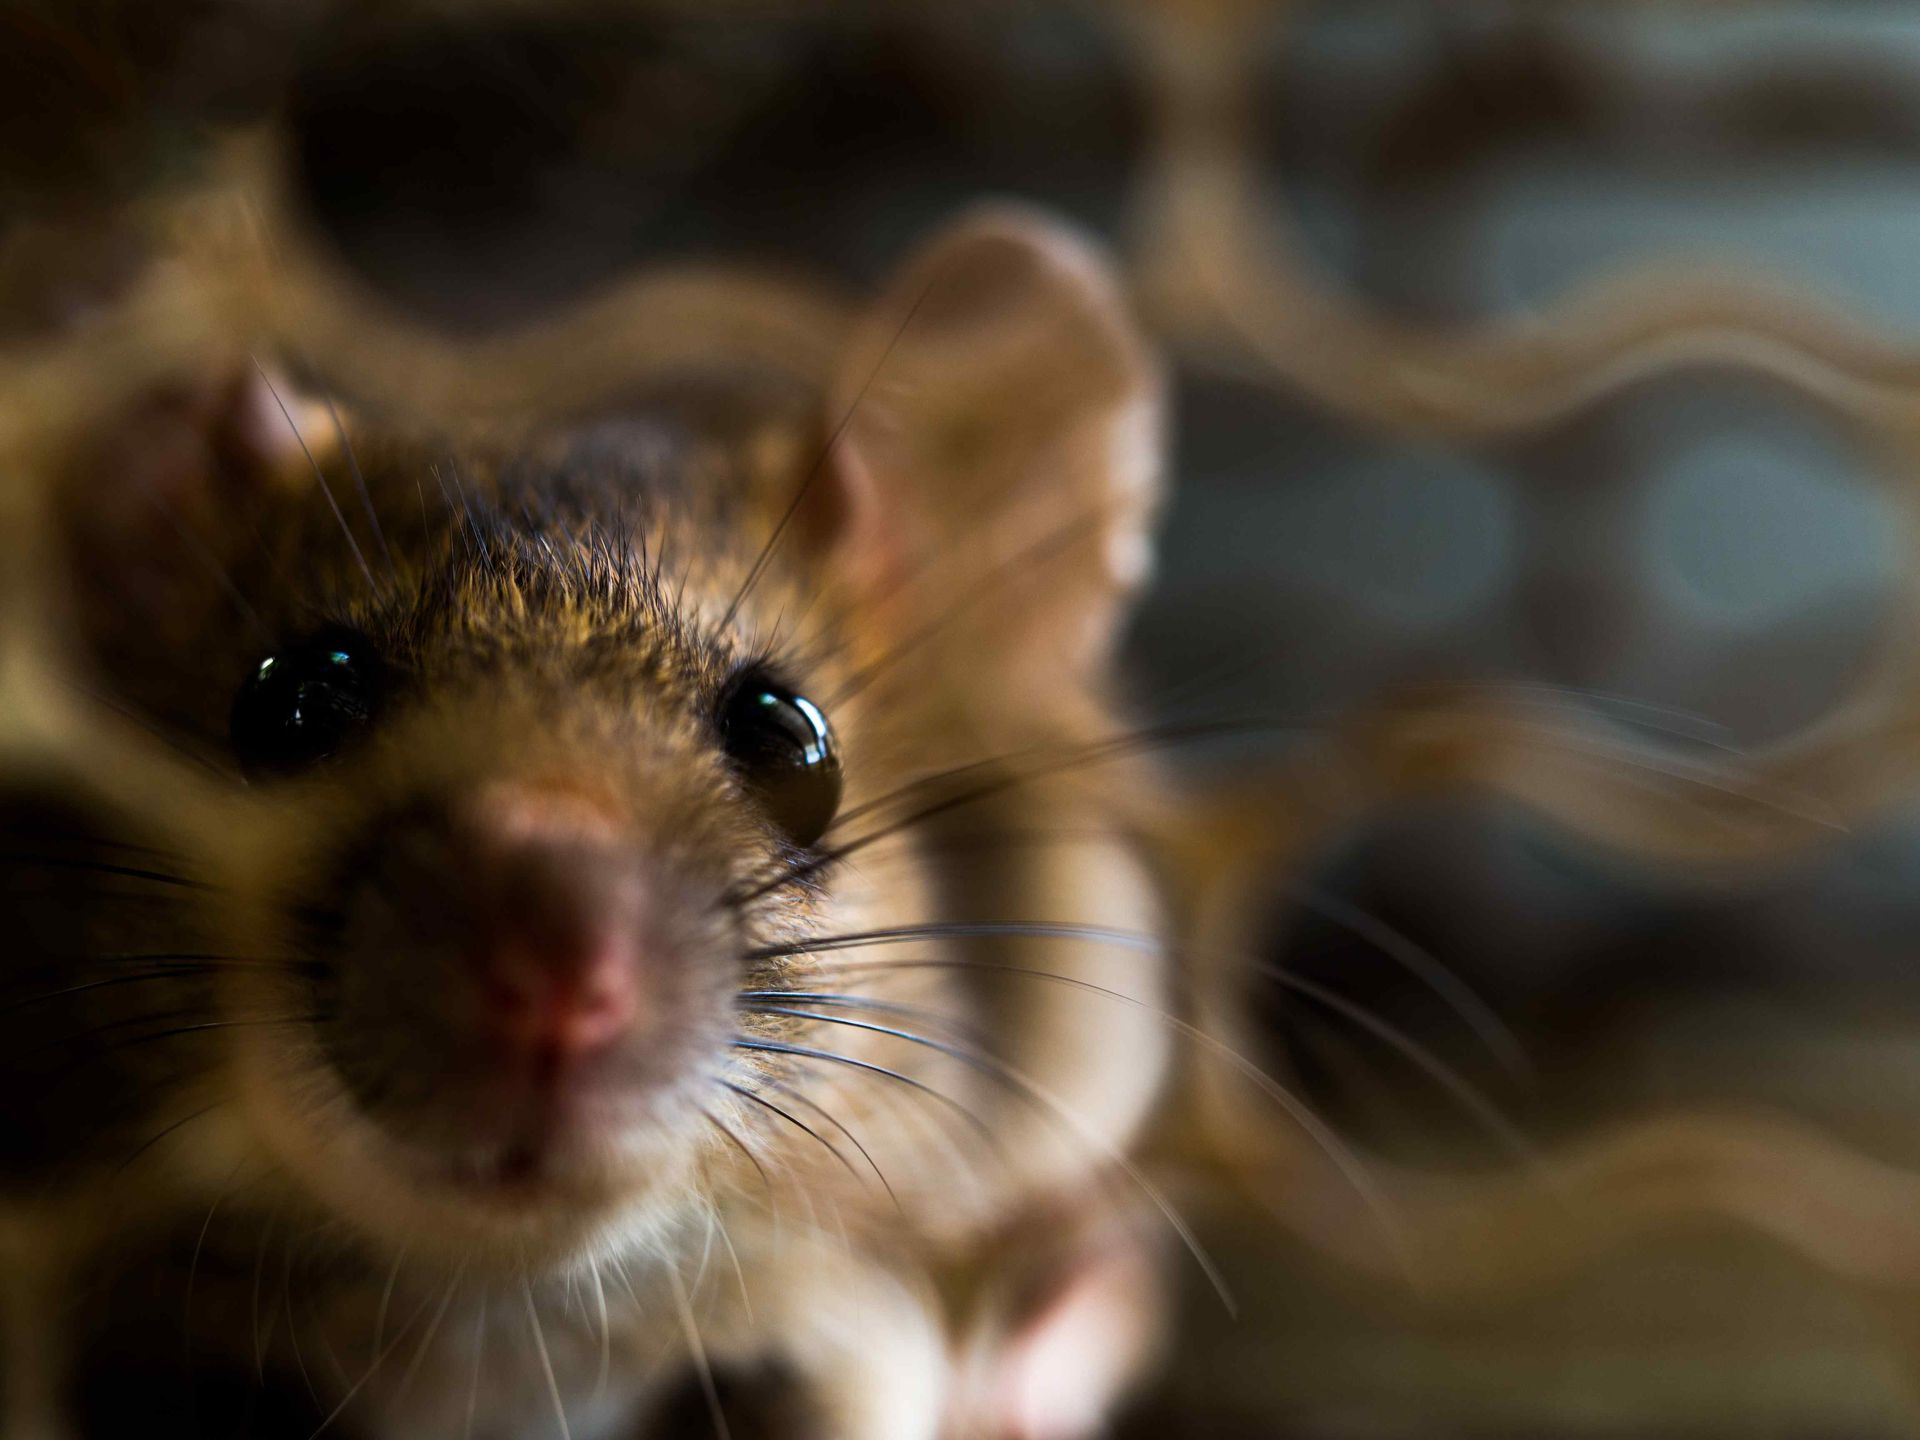 close up of a mouse's face